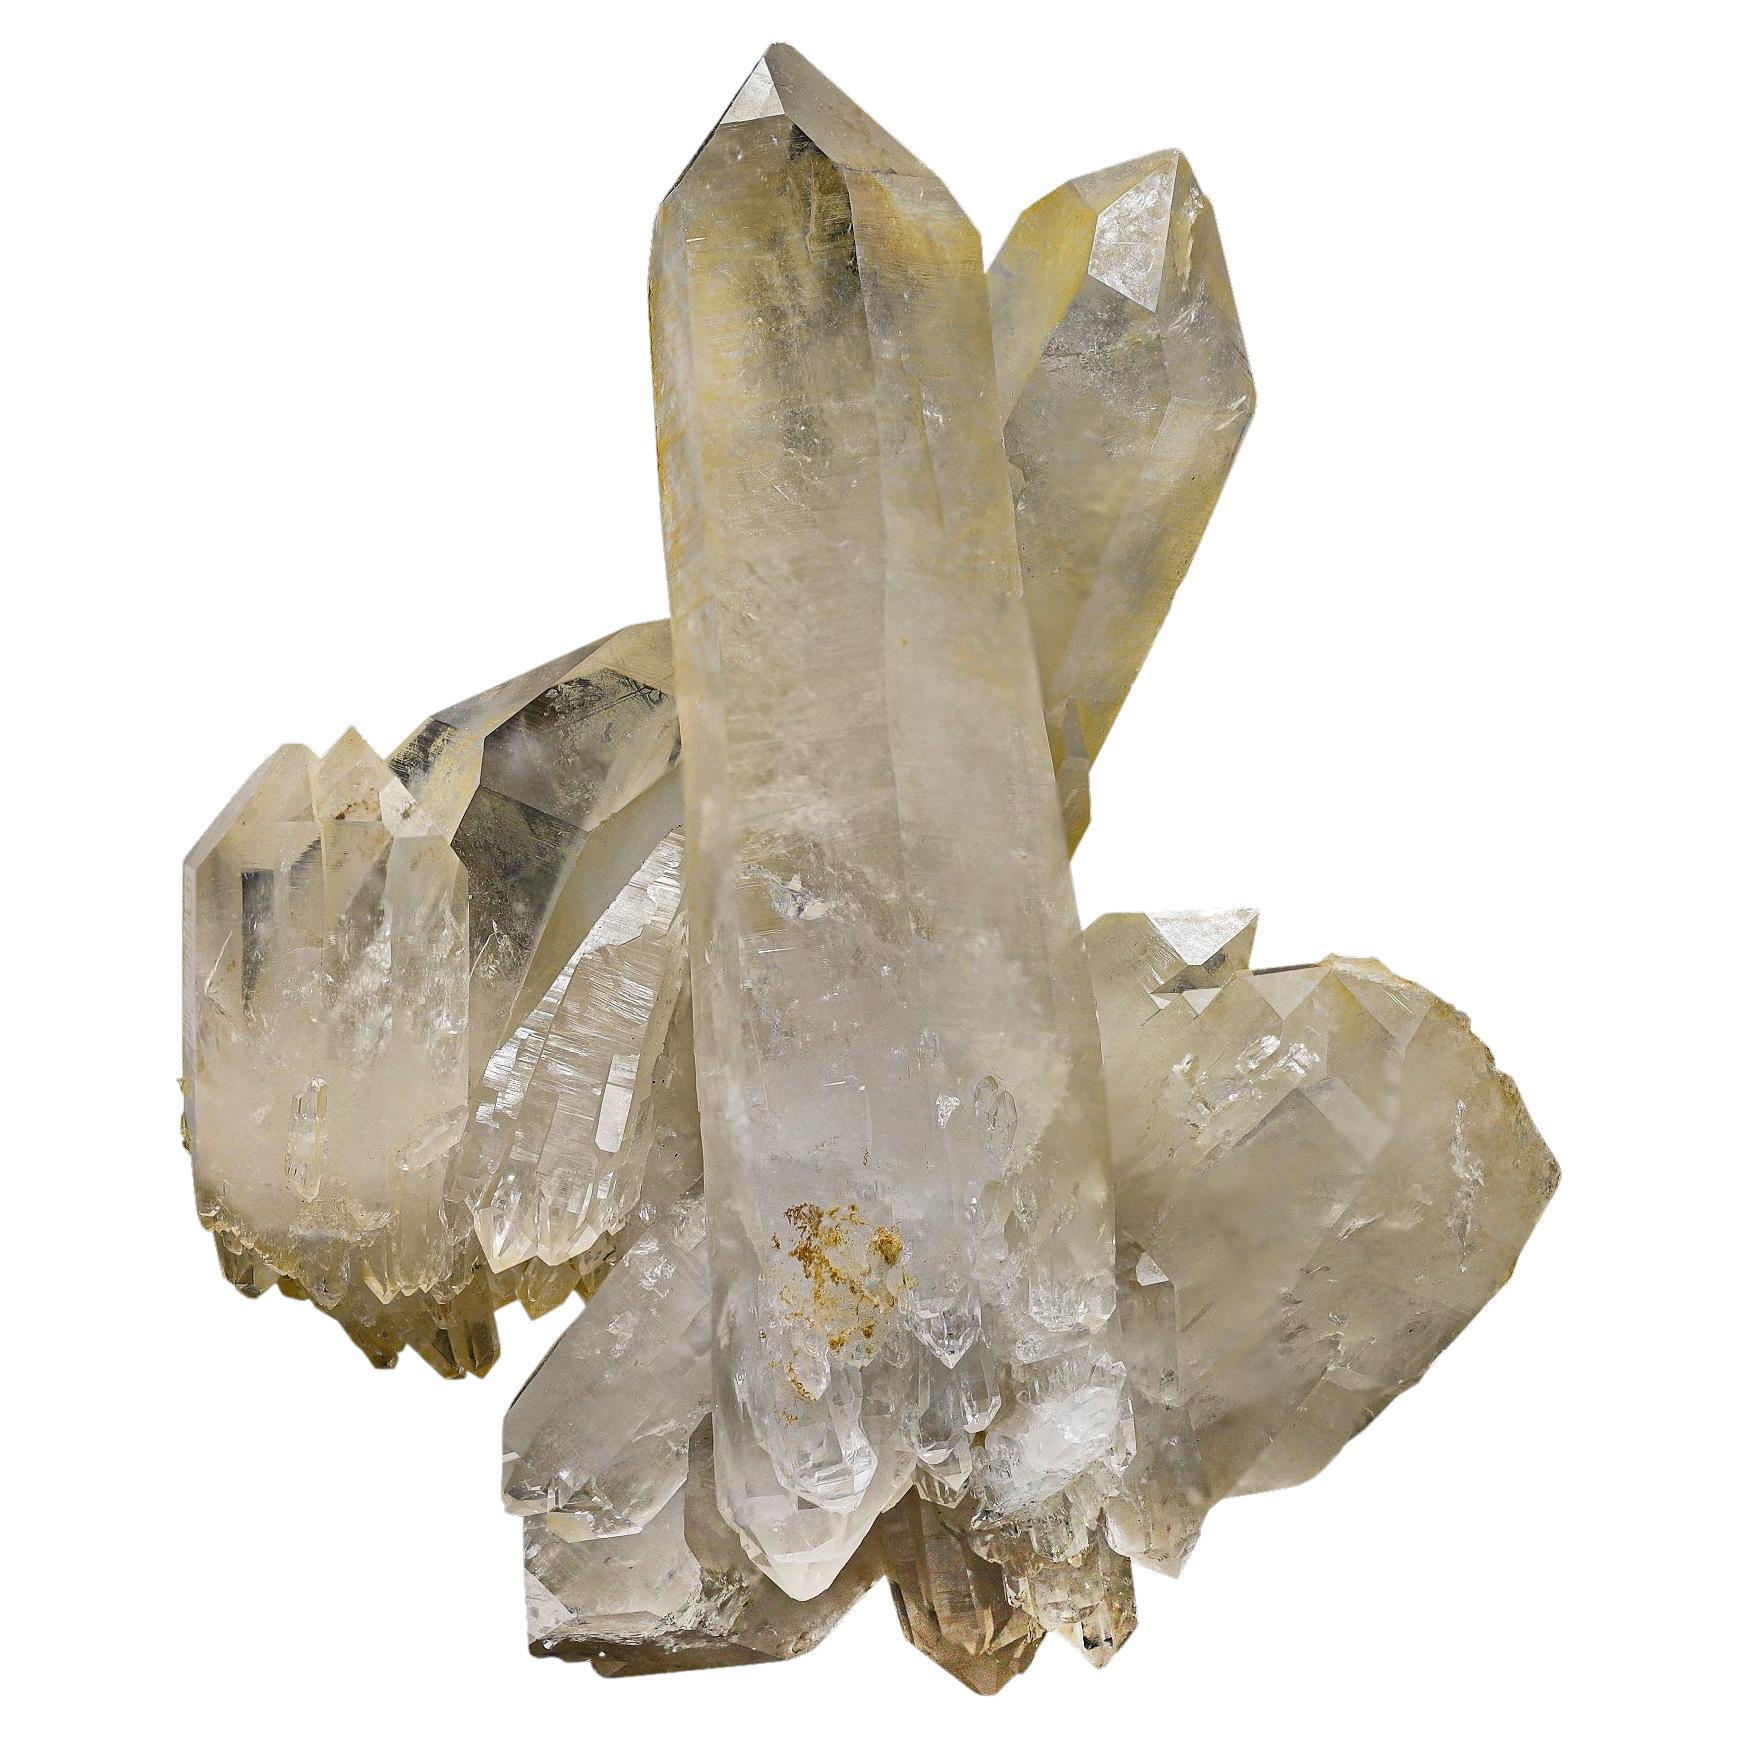 The Power Of Smokey Quartz Crystals From Pakistan For Sale The Perfect Piece For Sale